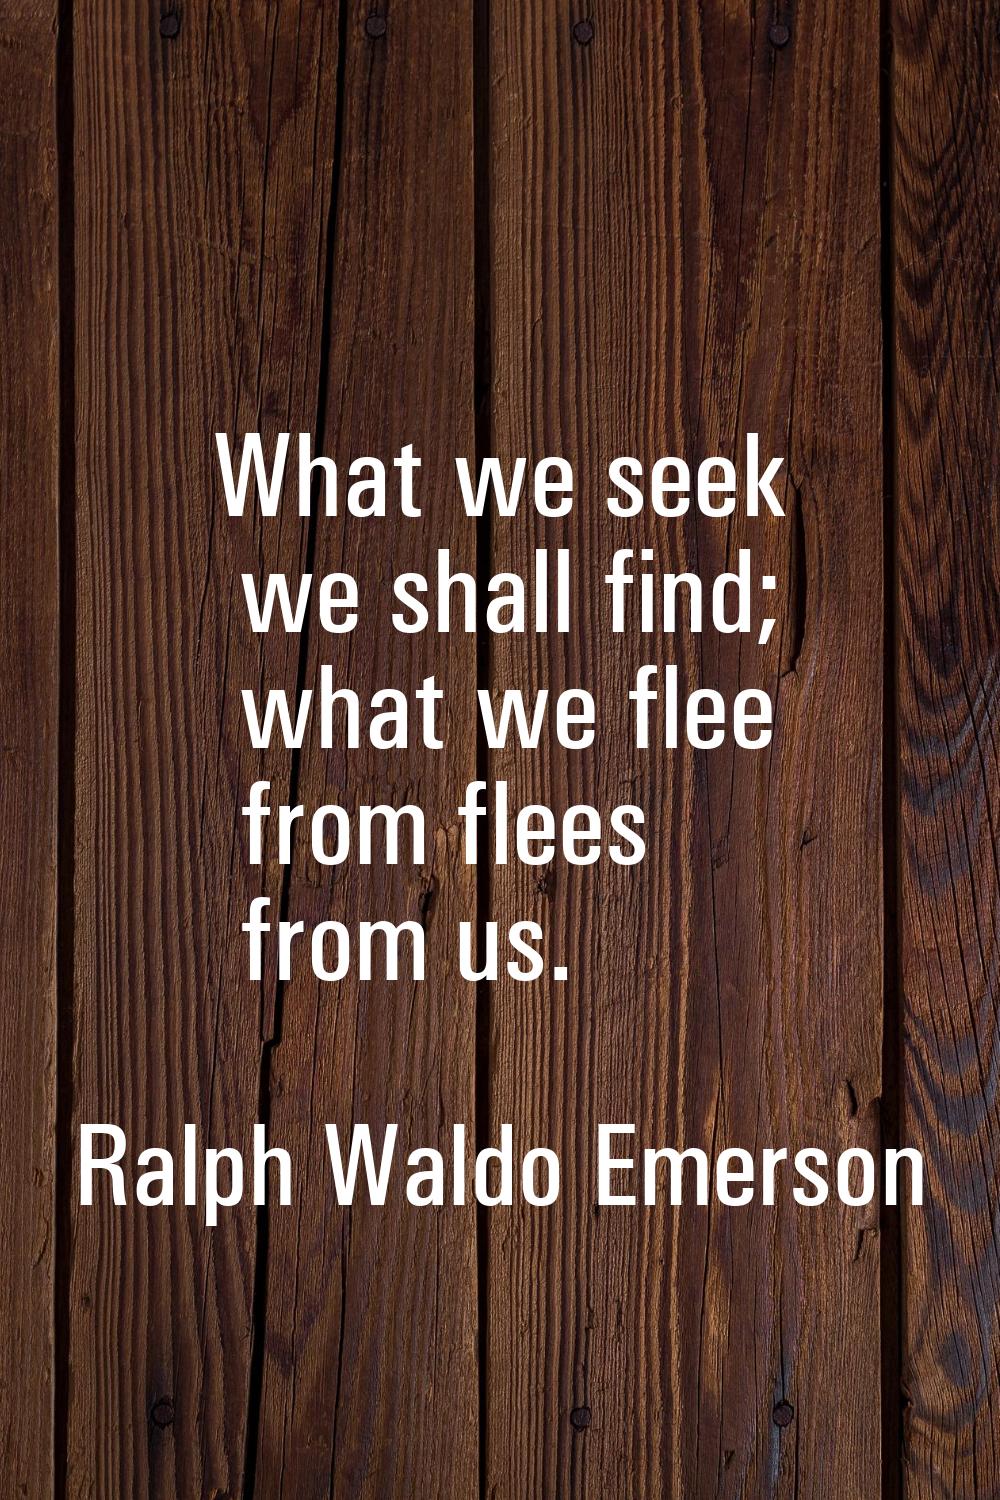 What we seek we shall find; what we flee from flees from us.